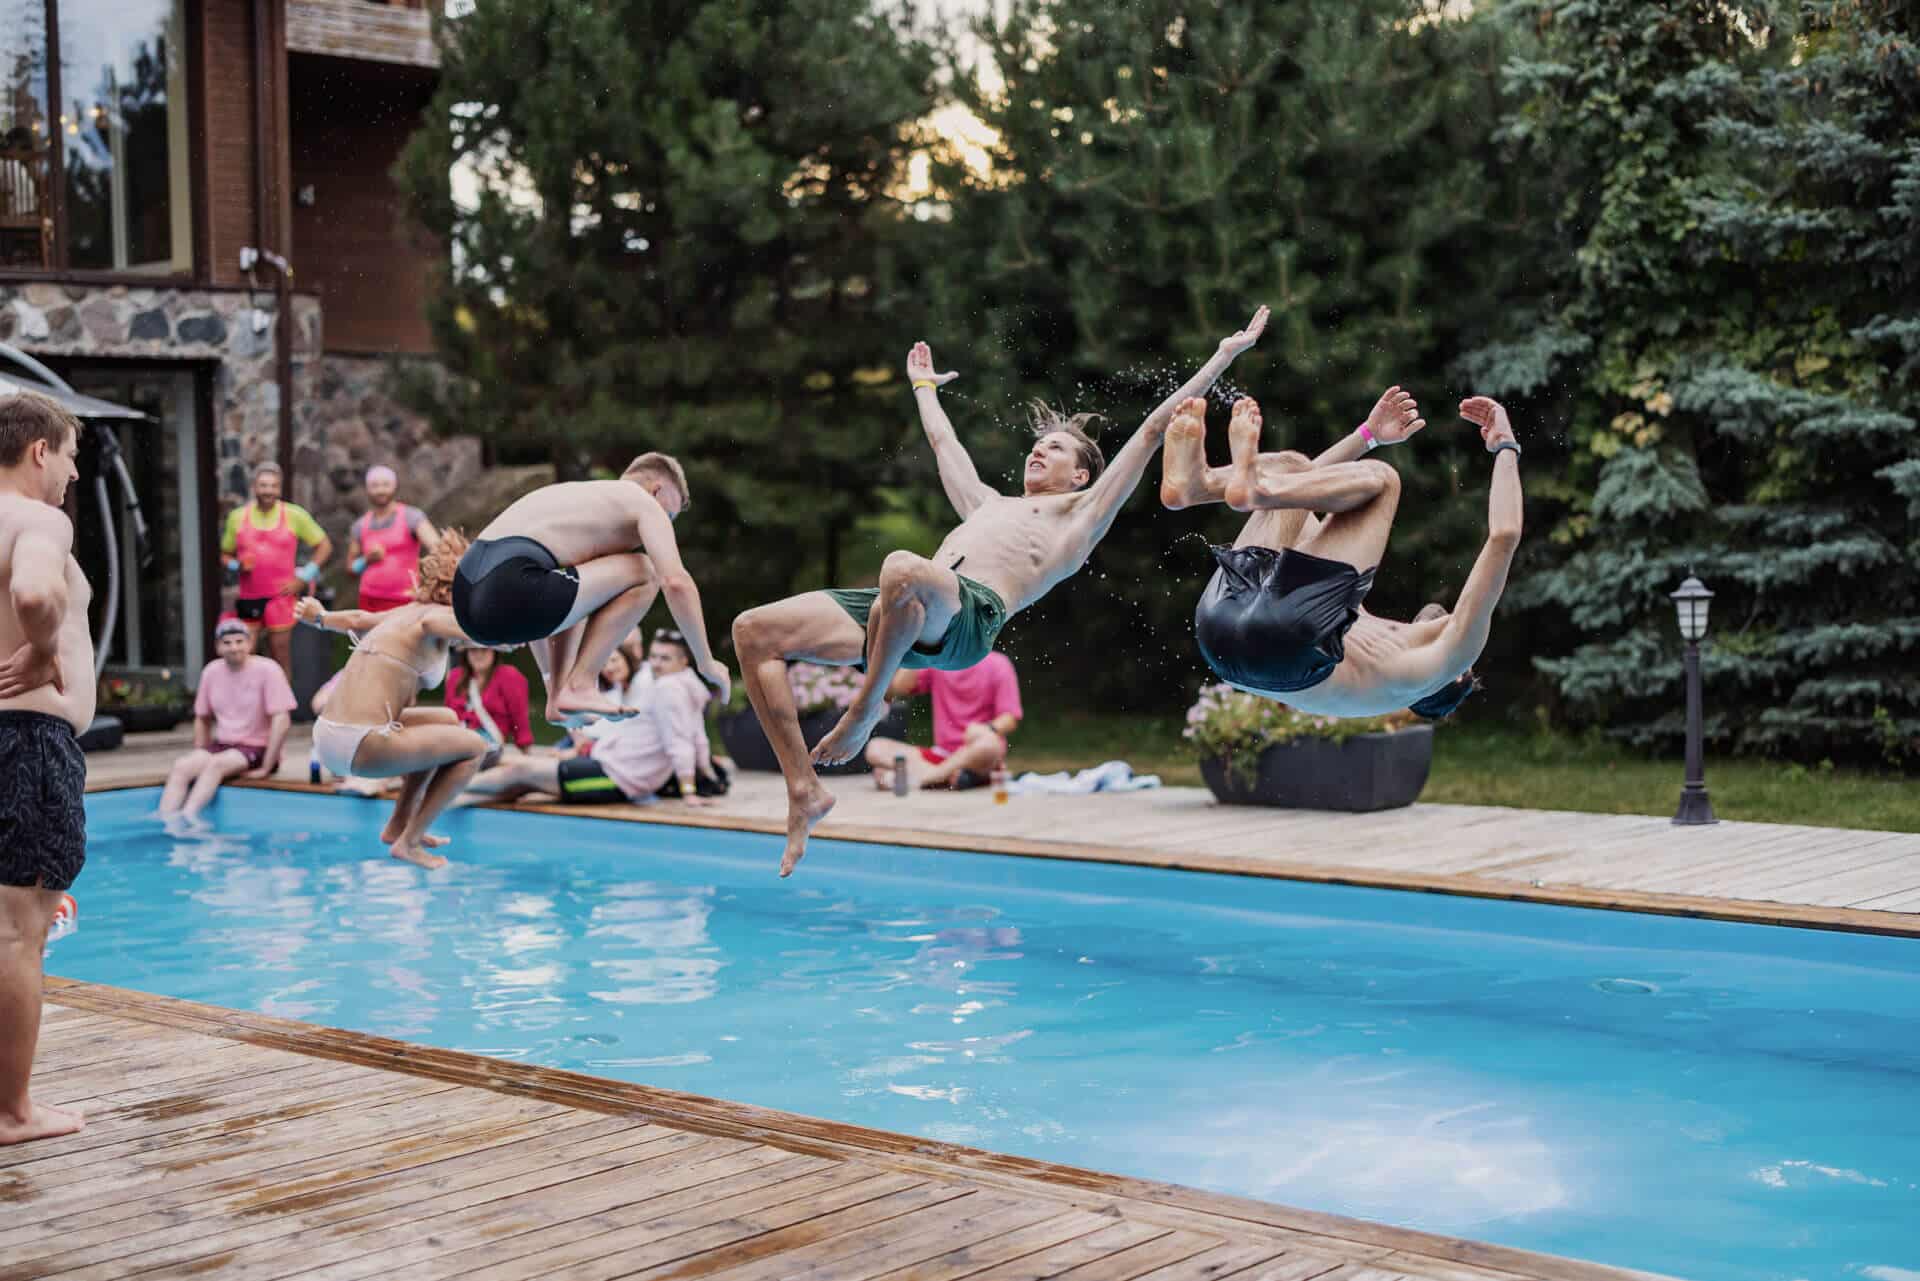 A group of Zenitech employees jumping into a swimming pool